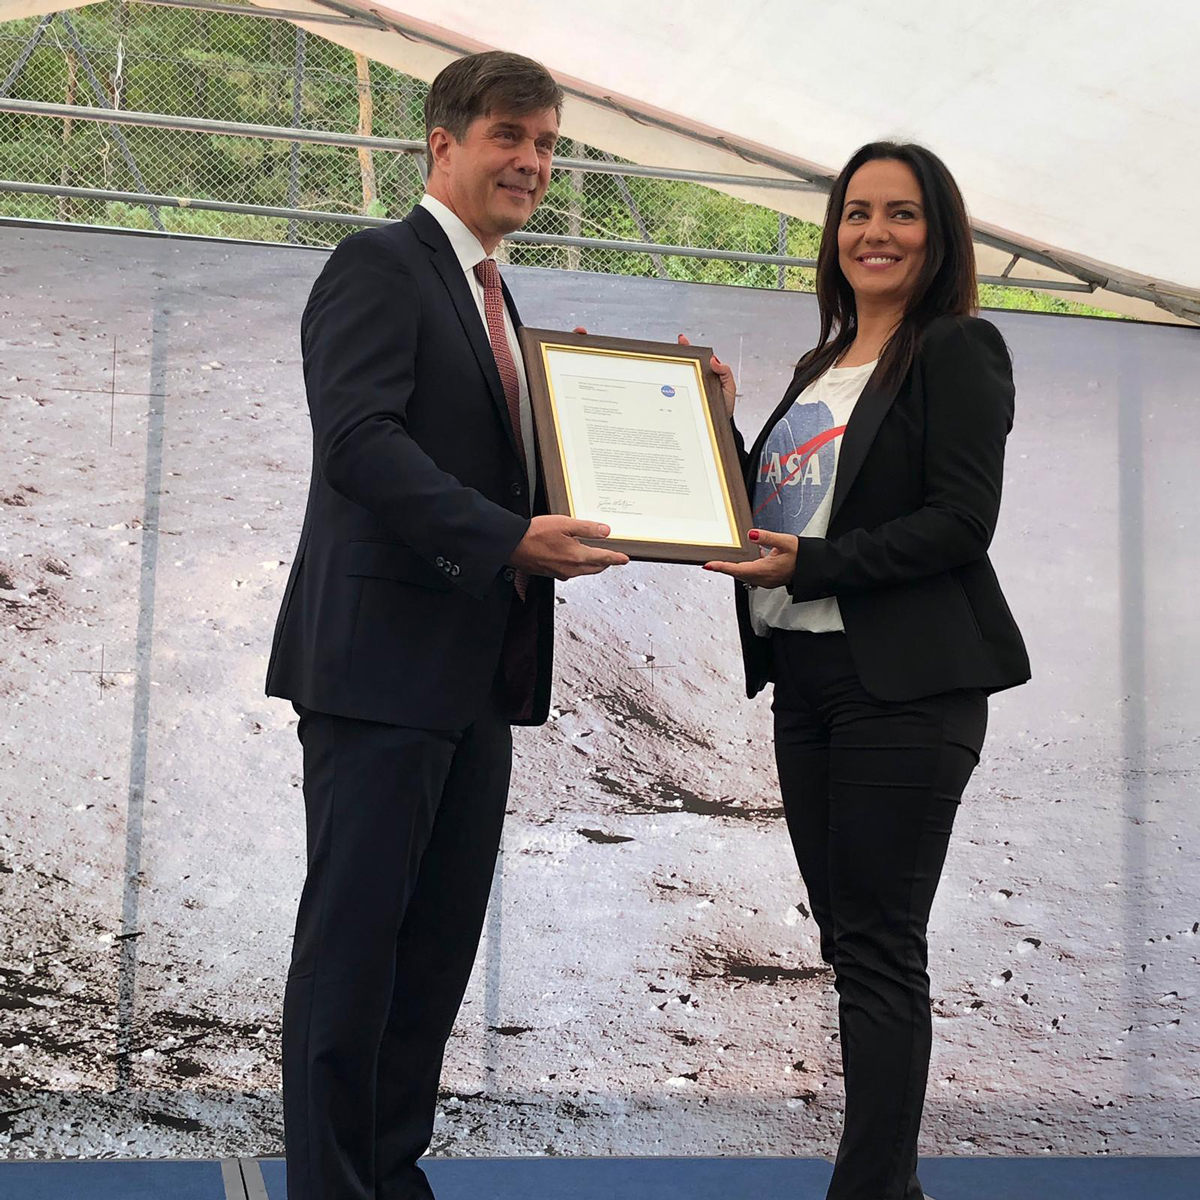 Eric Nelson, the U.S. Ambassador to Bosnia and Herzegovina, presents a framed letter to the Snezana Ružičić, mayor of the Balkan municipality of Jezero. The letter, from NASA's director of Mars Exploration, James Watzin, honored the connection between the small Balkan town and Jezero Crater the landing site of NASA's upcoming Mars 2020 mission.